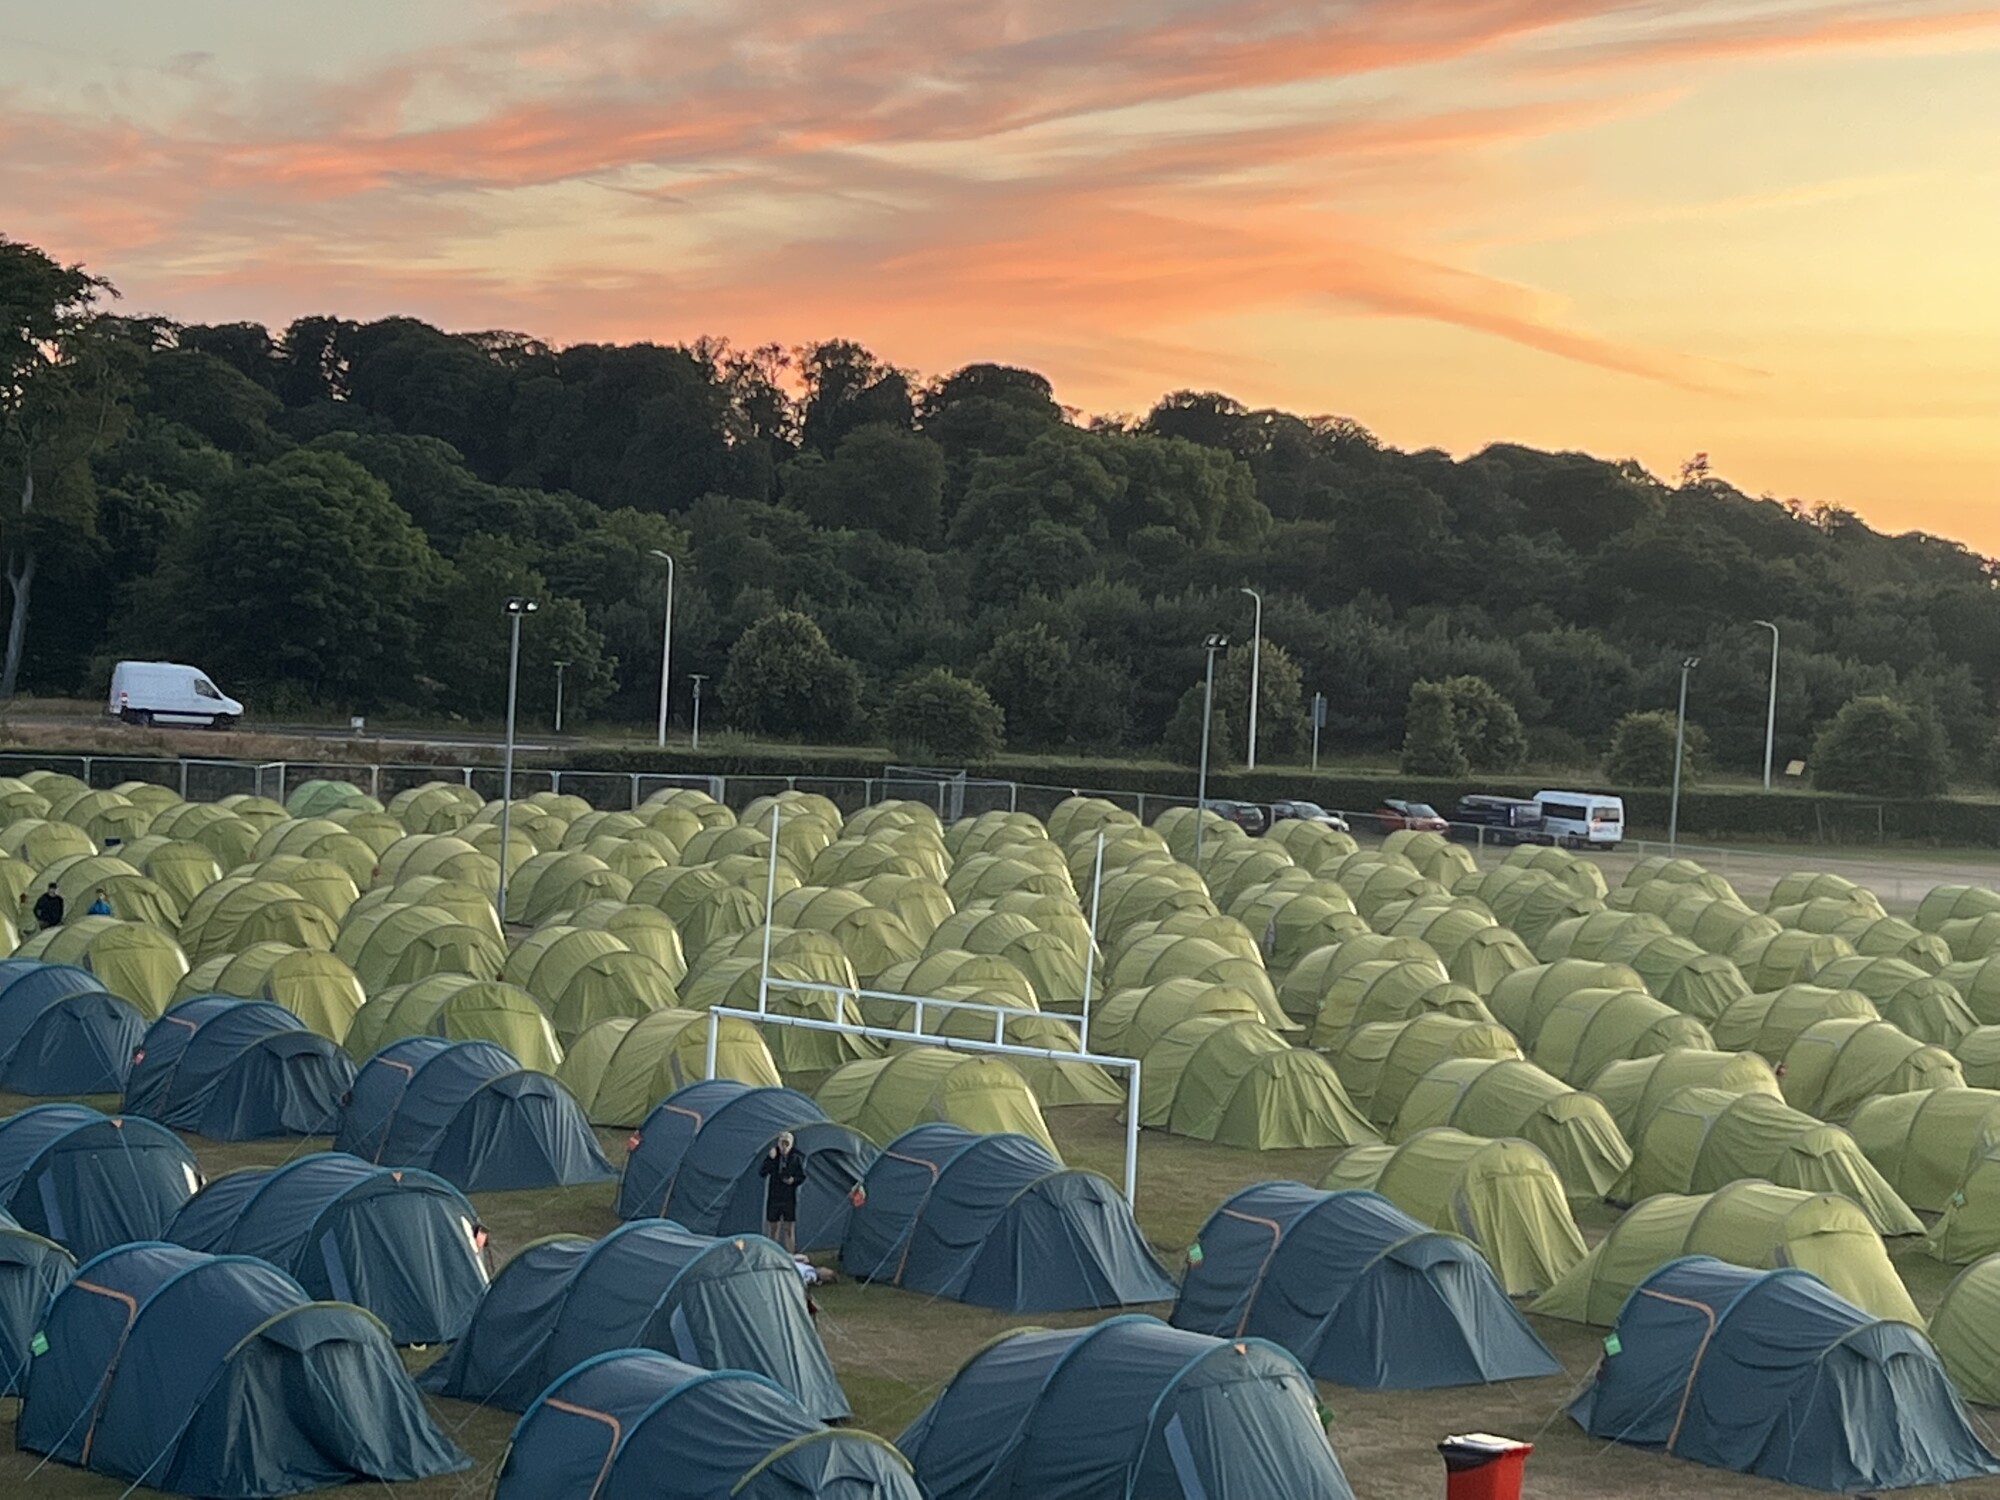 770 cozy nylon tents stand in front of the 17th green of the Old Course in St. Andrews.